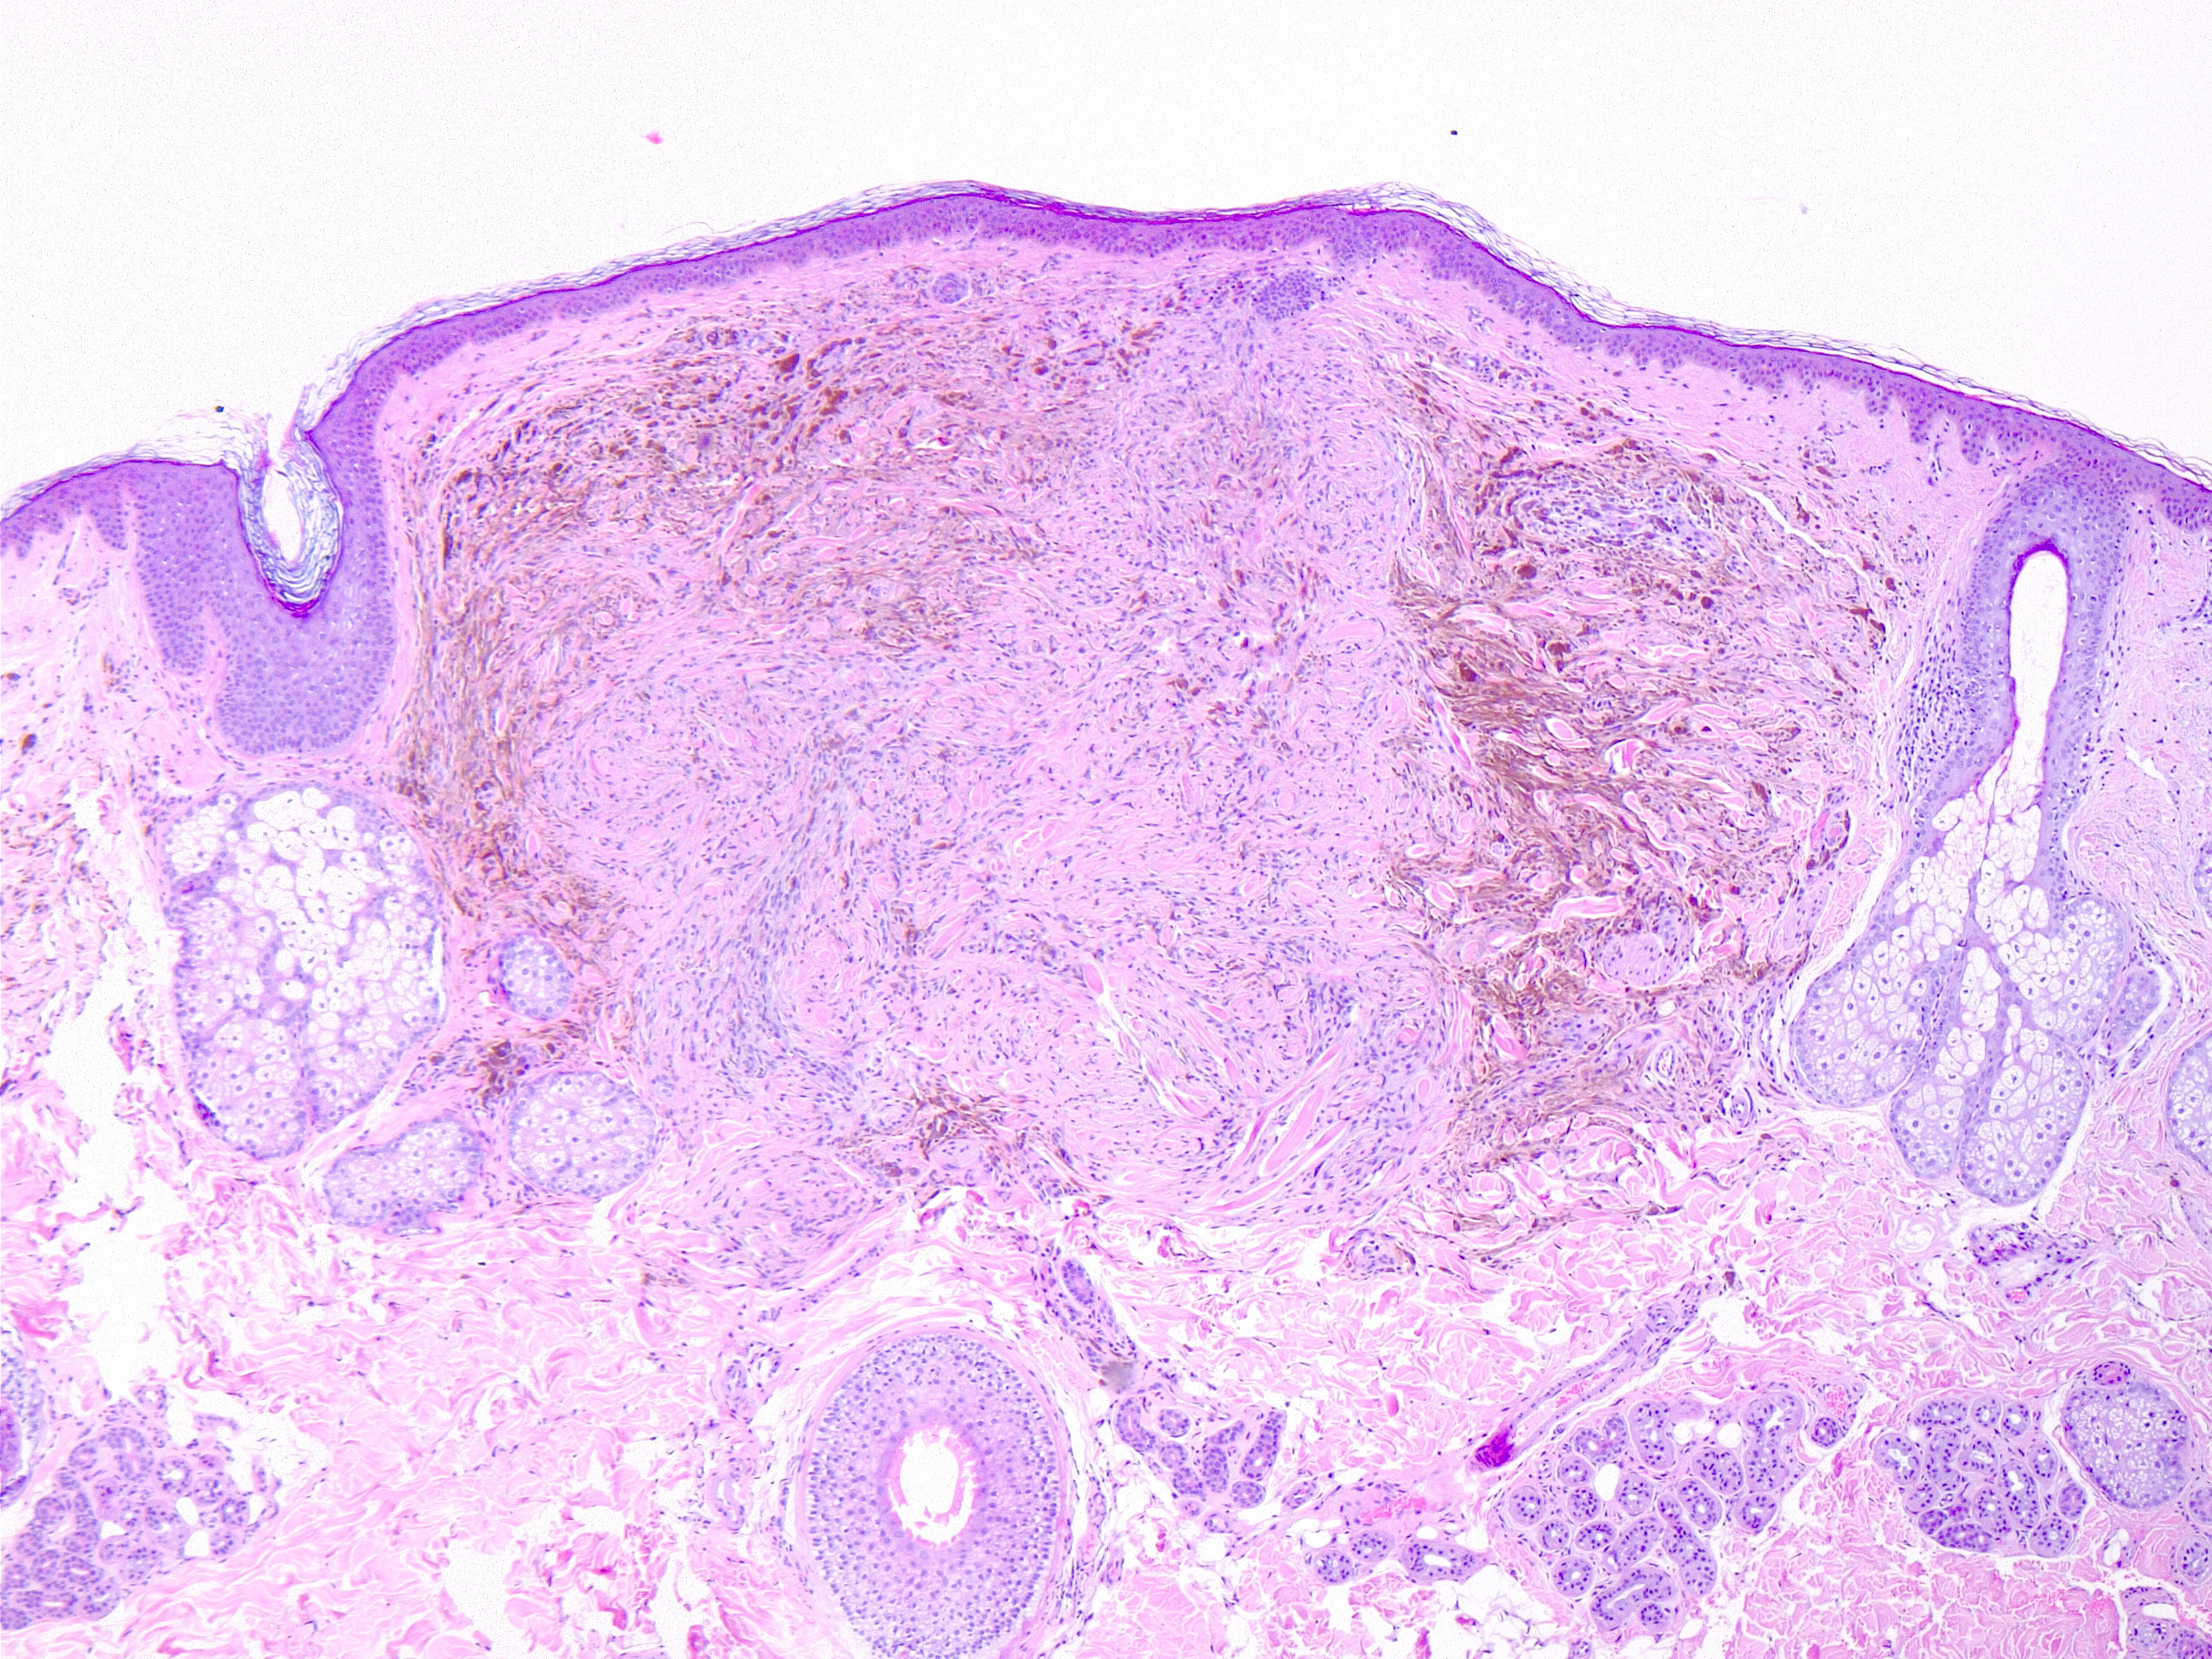 Blue nevus, H/E 4x. Spindle-shaped melanocytes in upper and mid-dermis, without nest formation. Melanocytes are pigmented, show no nuclear atypia or mitoses and many melanophages are arranged between spindled-dendritic melanocytes and collagenous stroma.